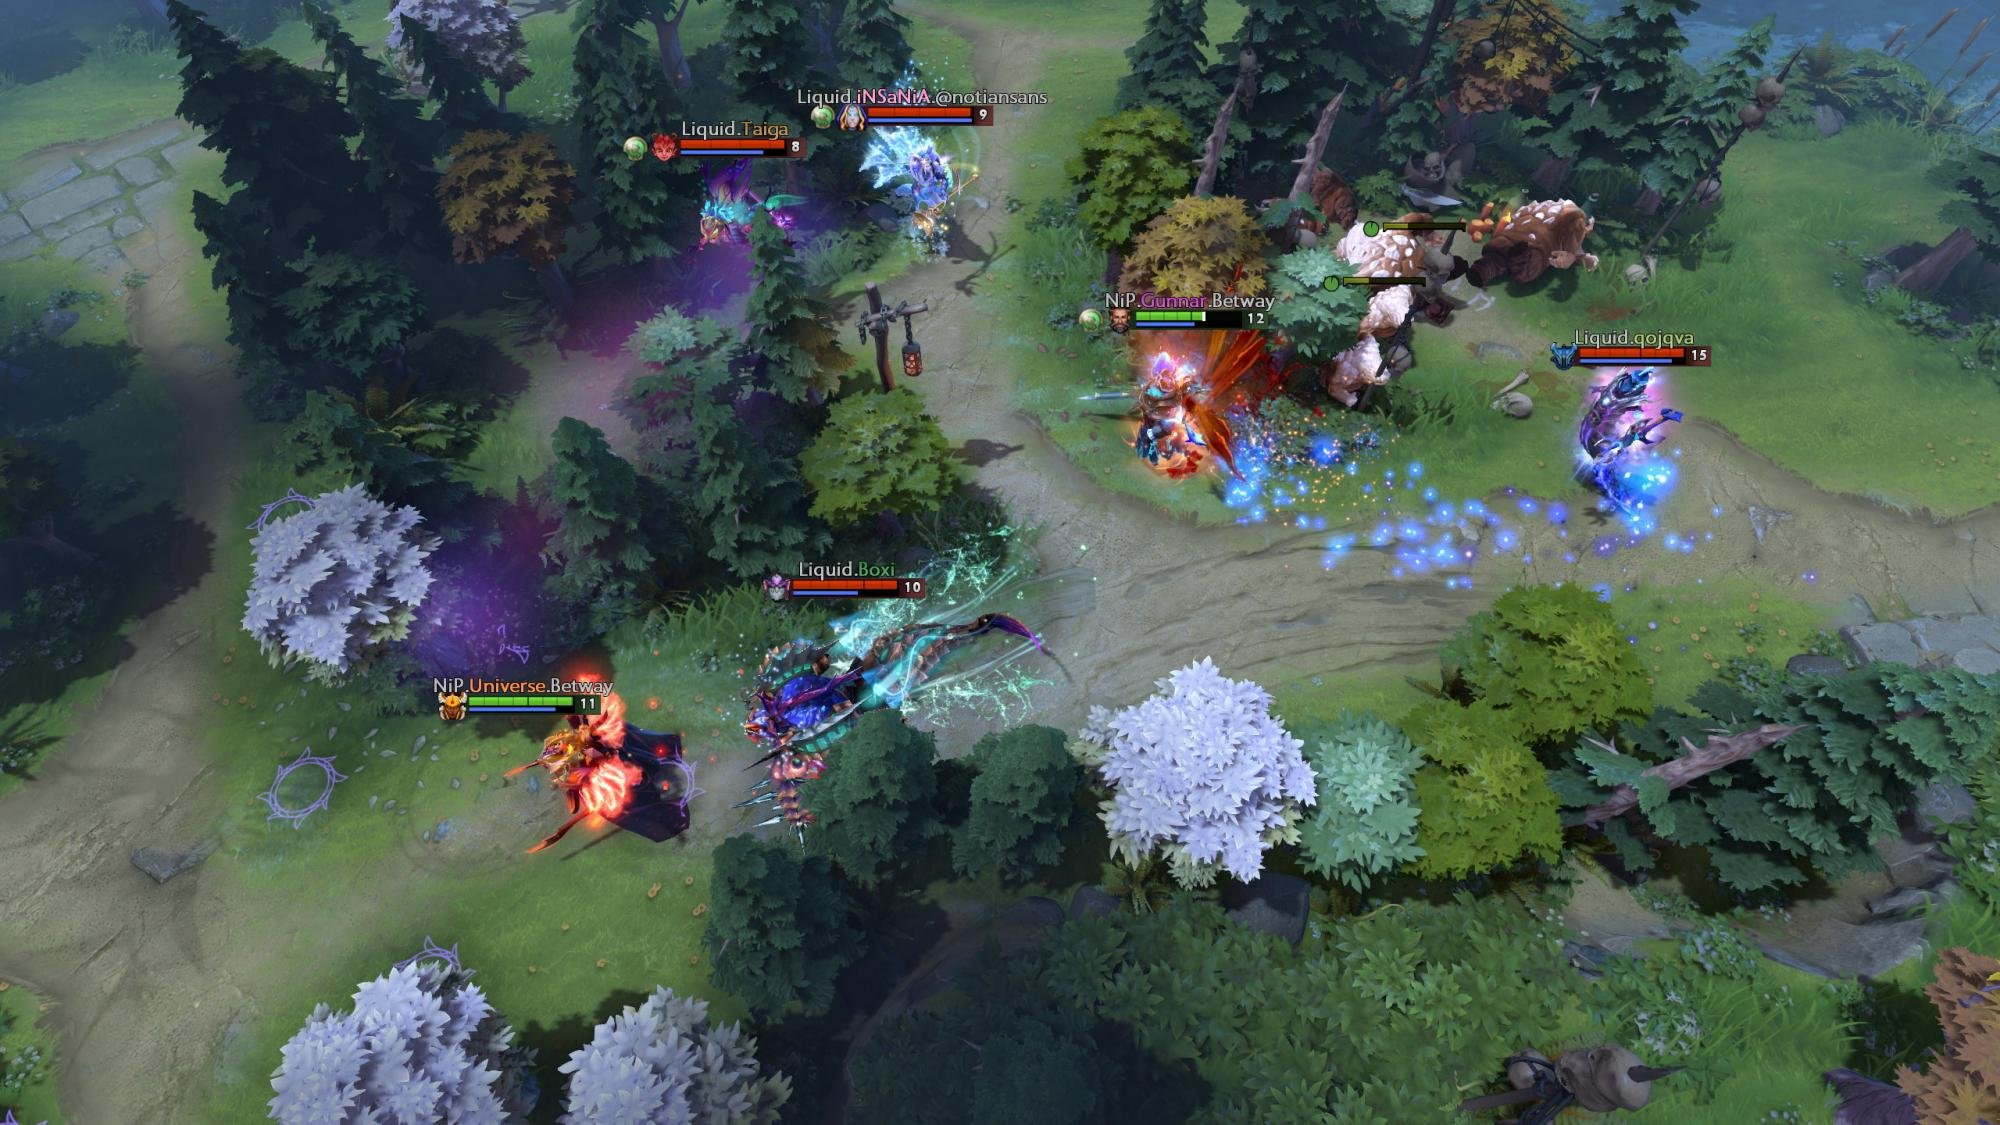 Dota 2 System Requirements: How To Start Playing The Game